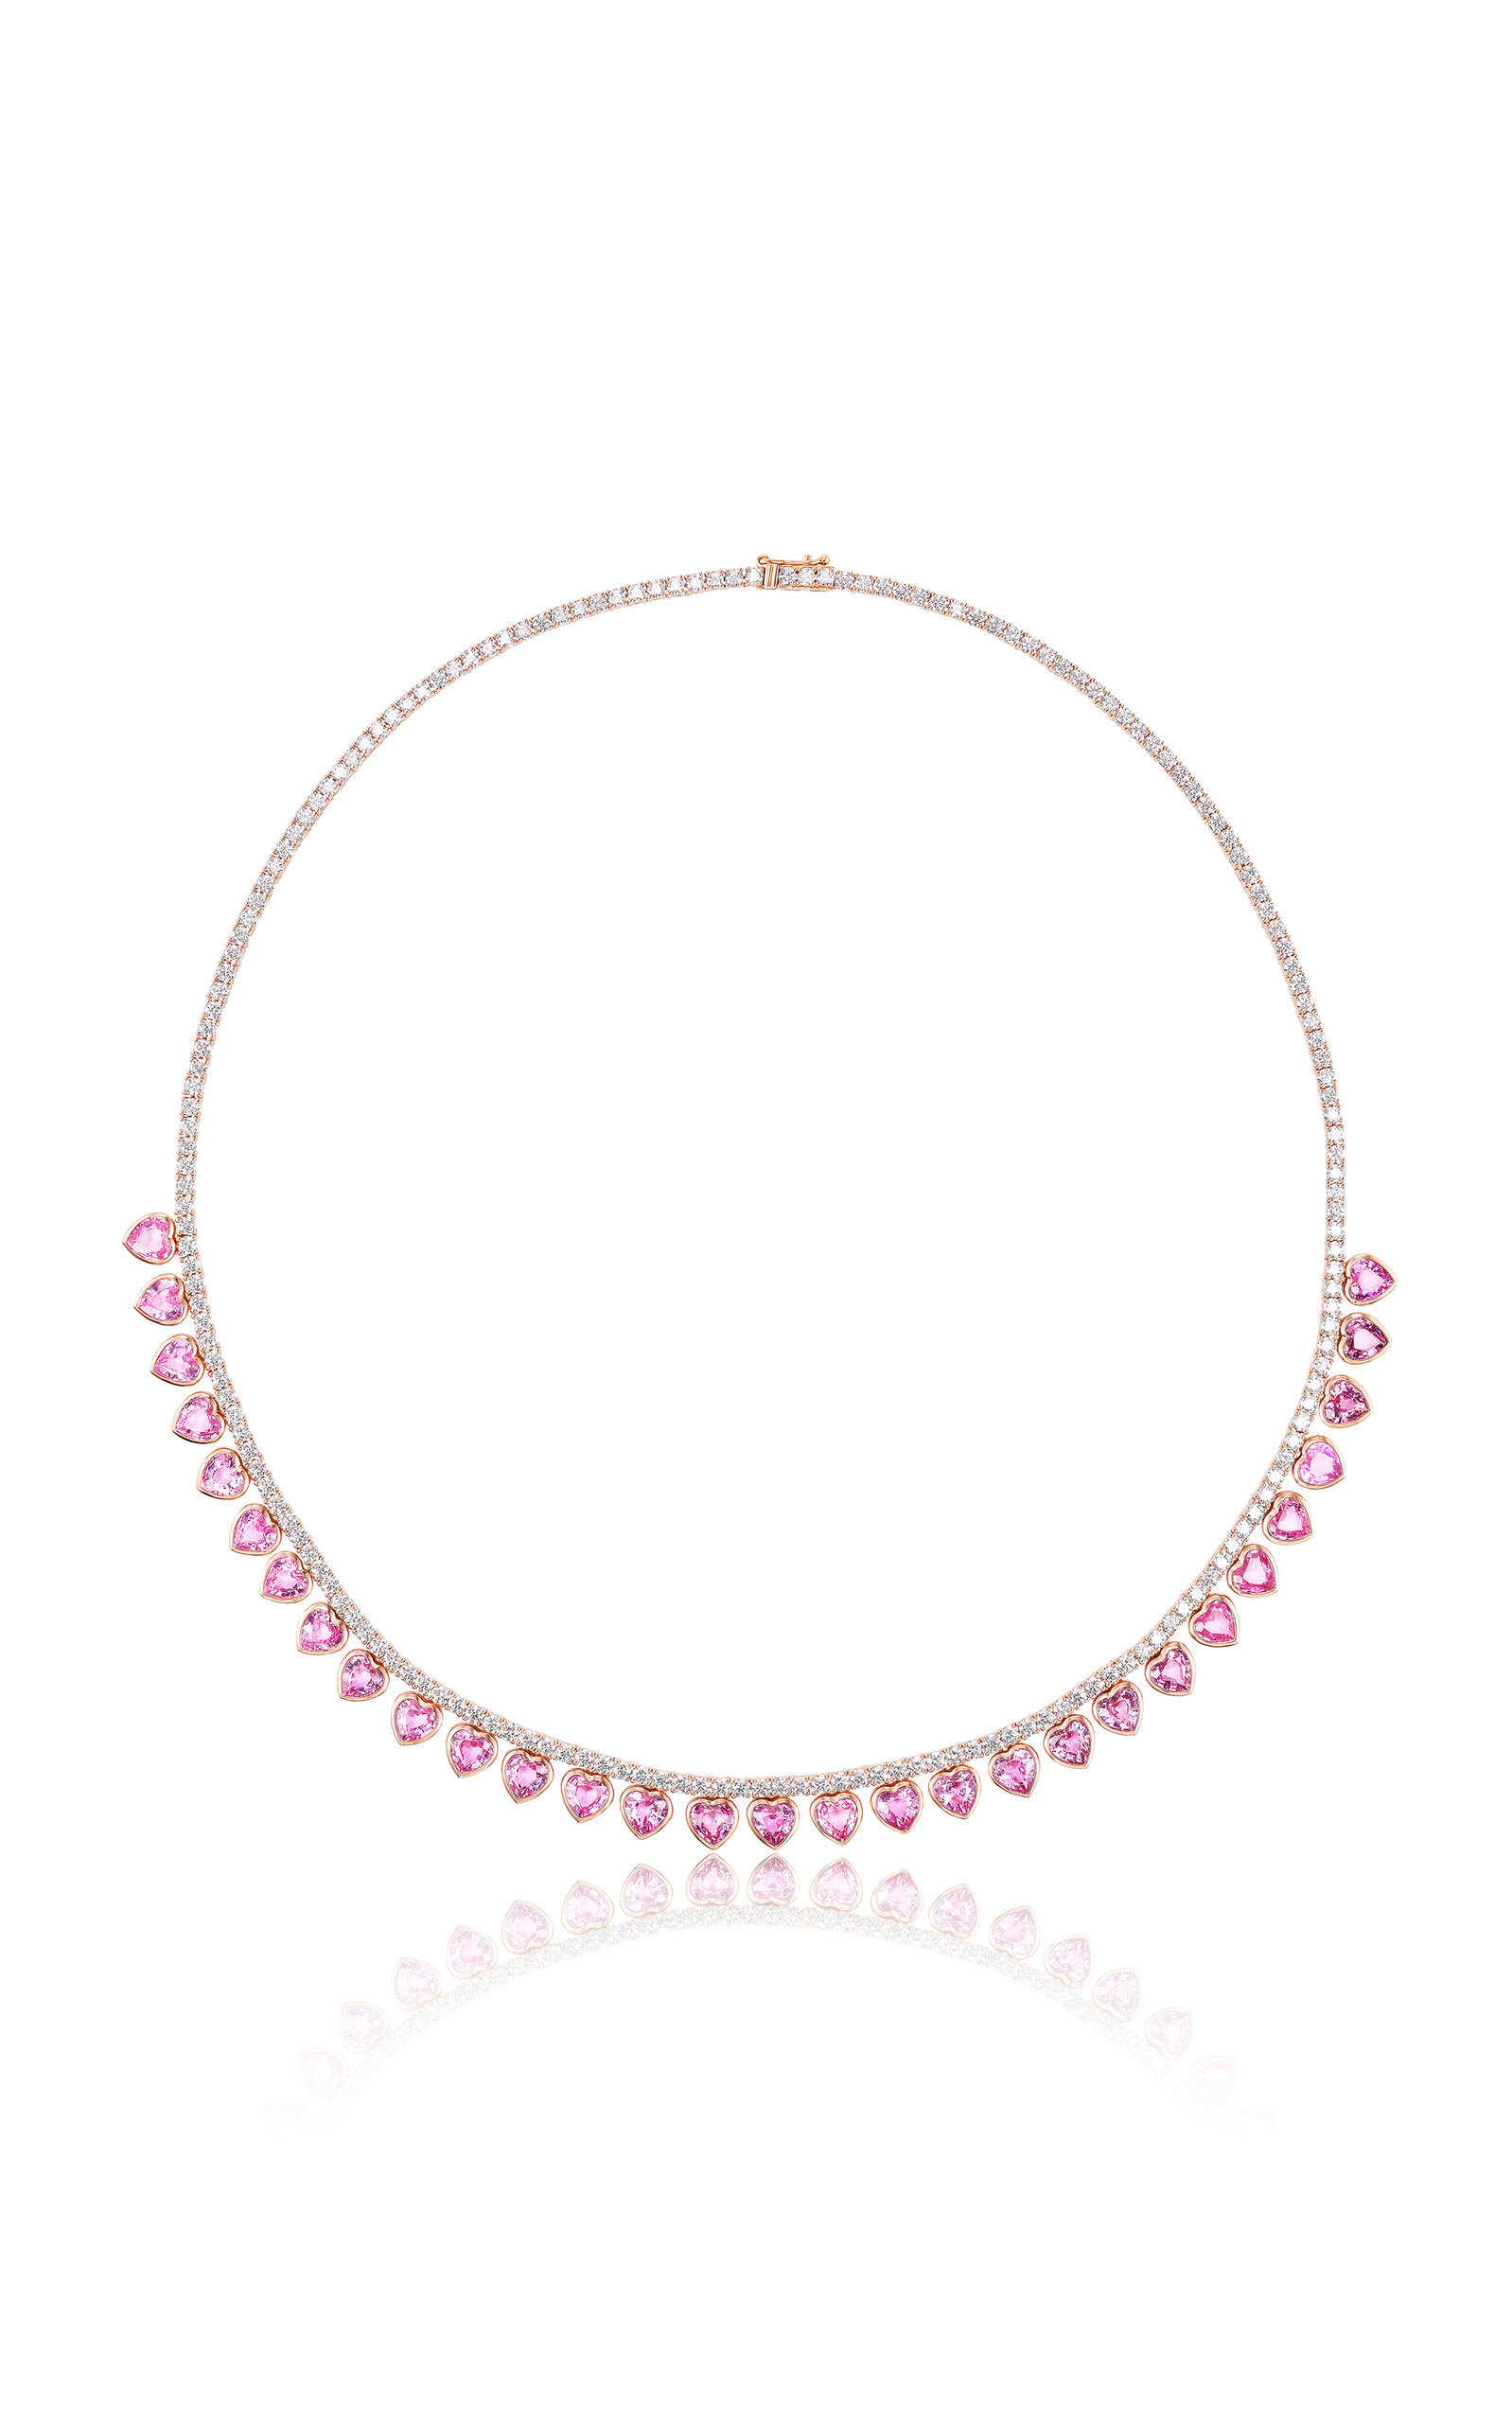 Emily P Wheeler 18k Rose And White Gold Bride Necklace In Pink